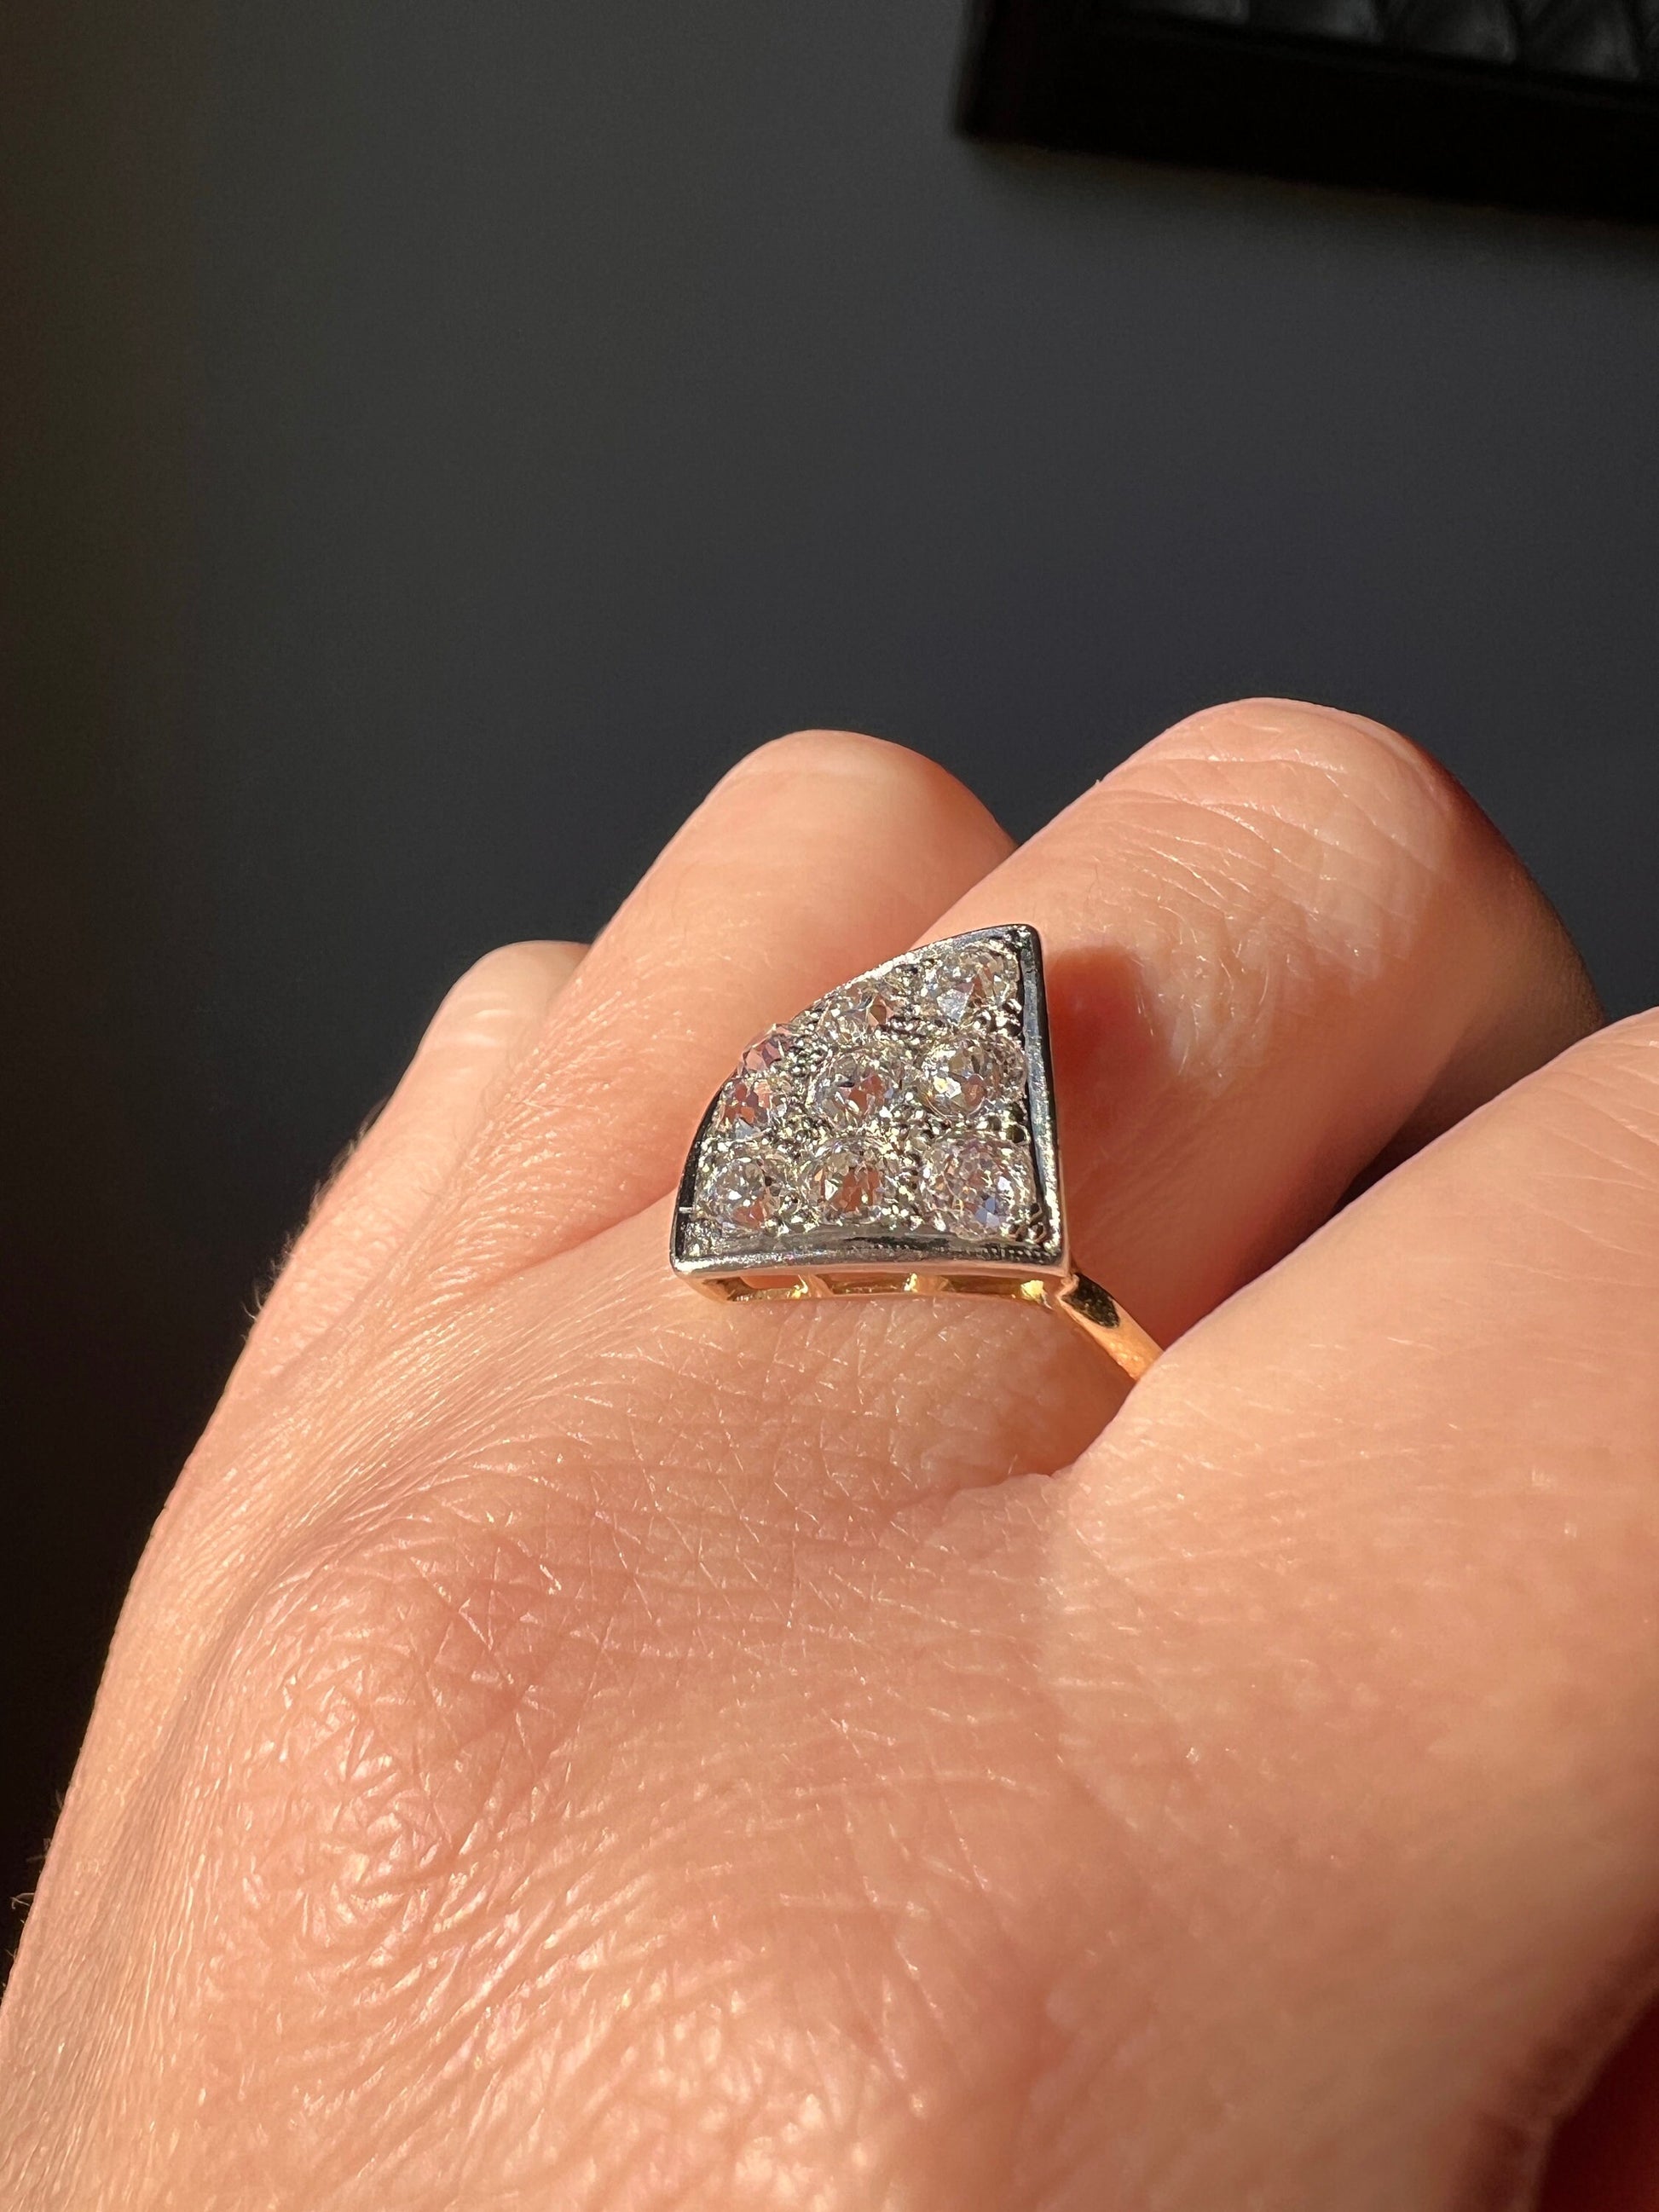 CURVED Unique 1.25 Carat Nine Old Mine Cut DIAMOND Cluster Kite Grid Ring French Antique 18k Gold Geometric Stacker Cobblestone Texture Gift